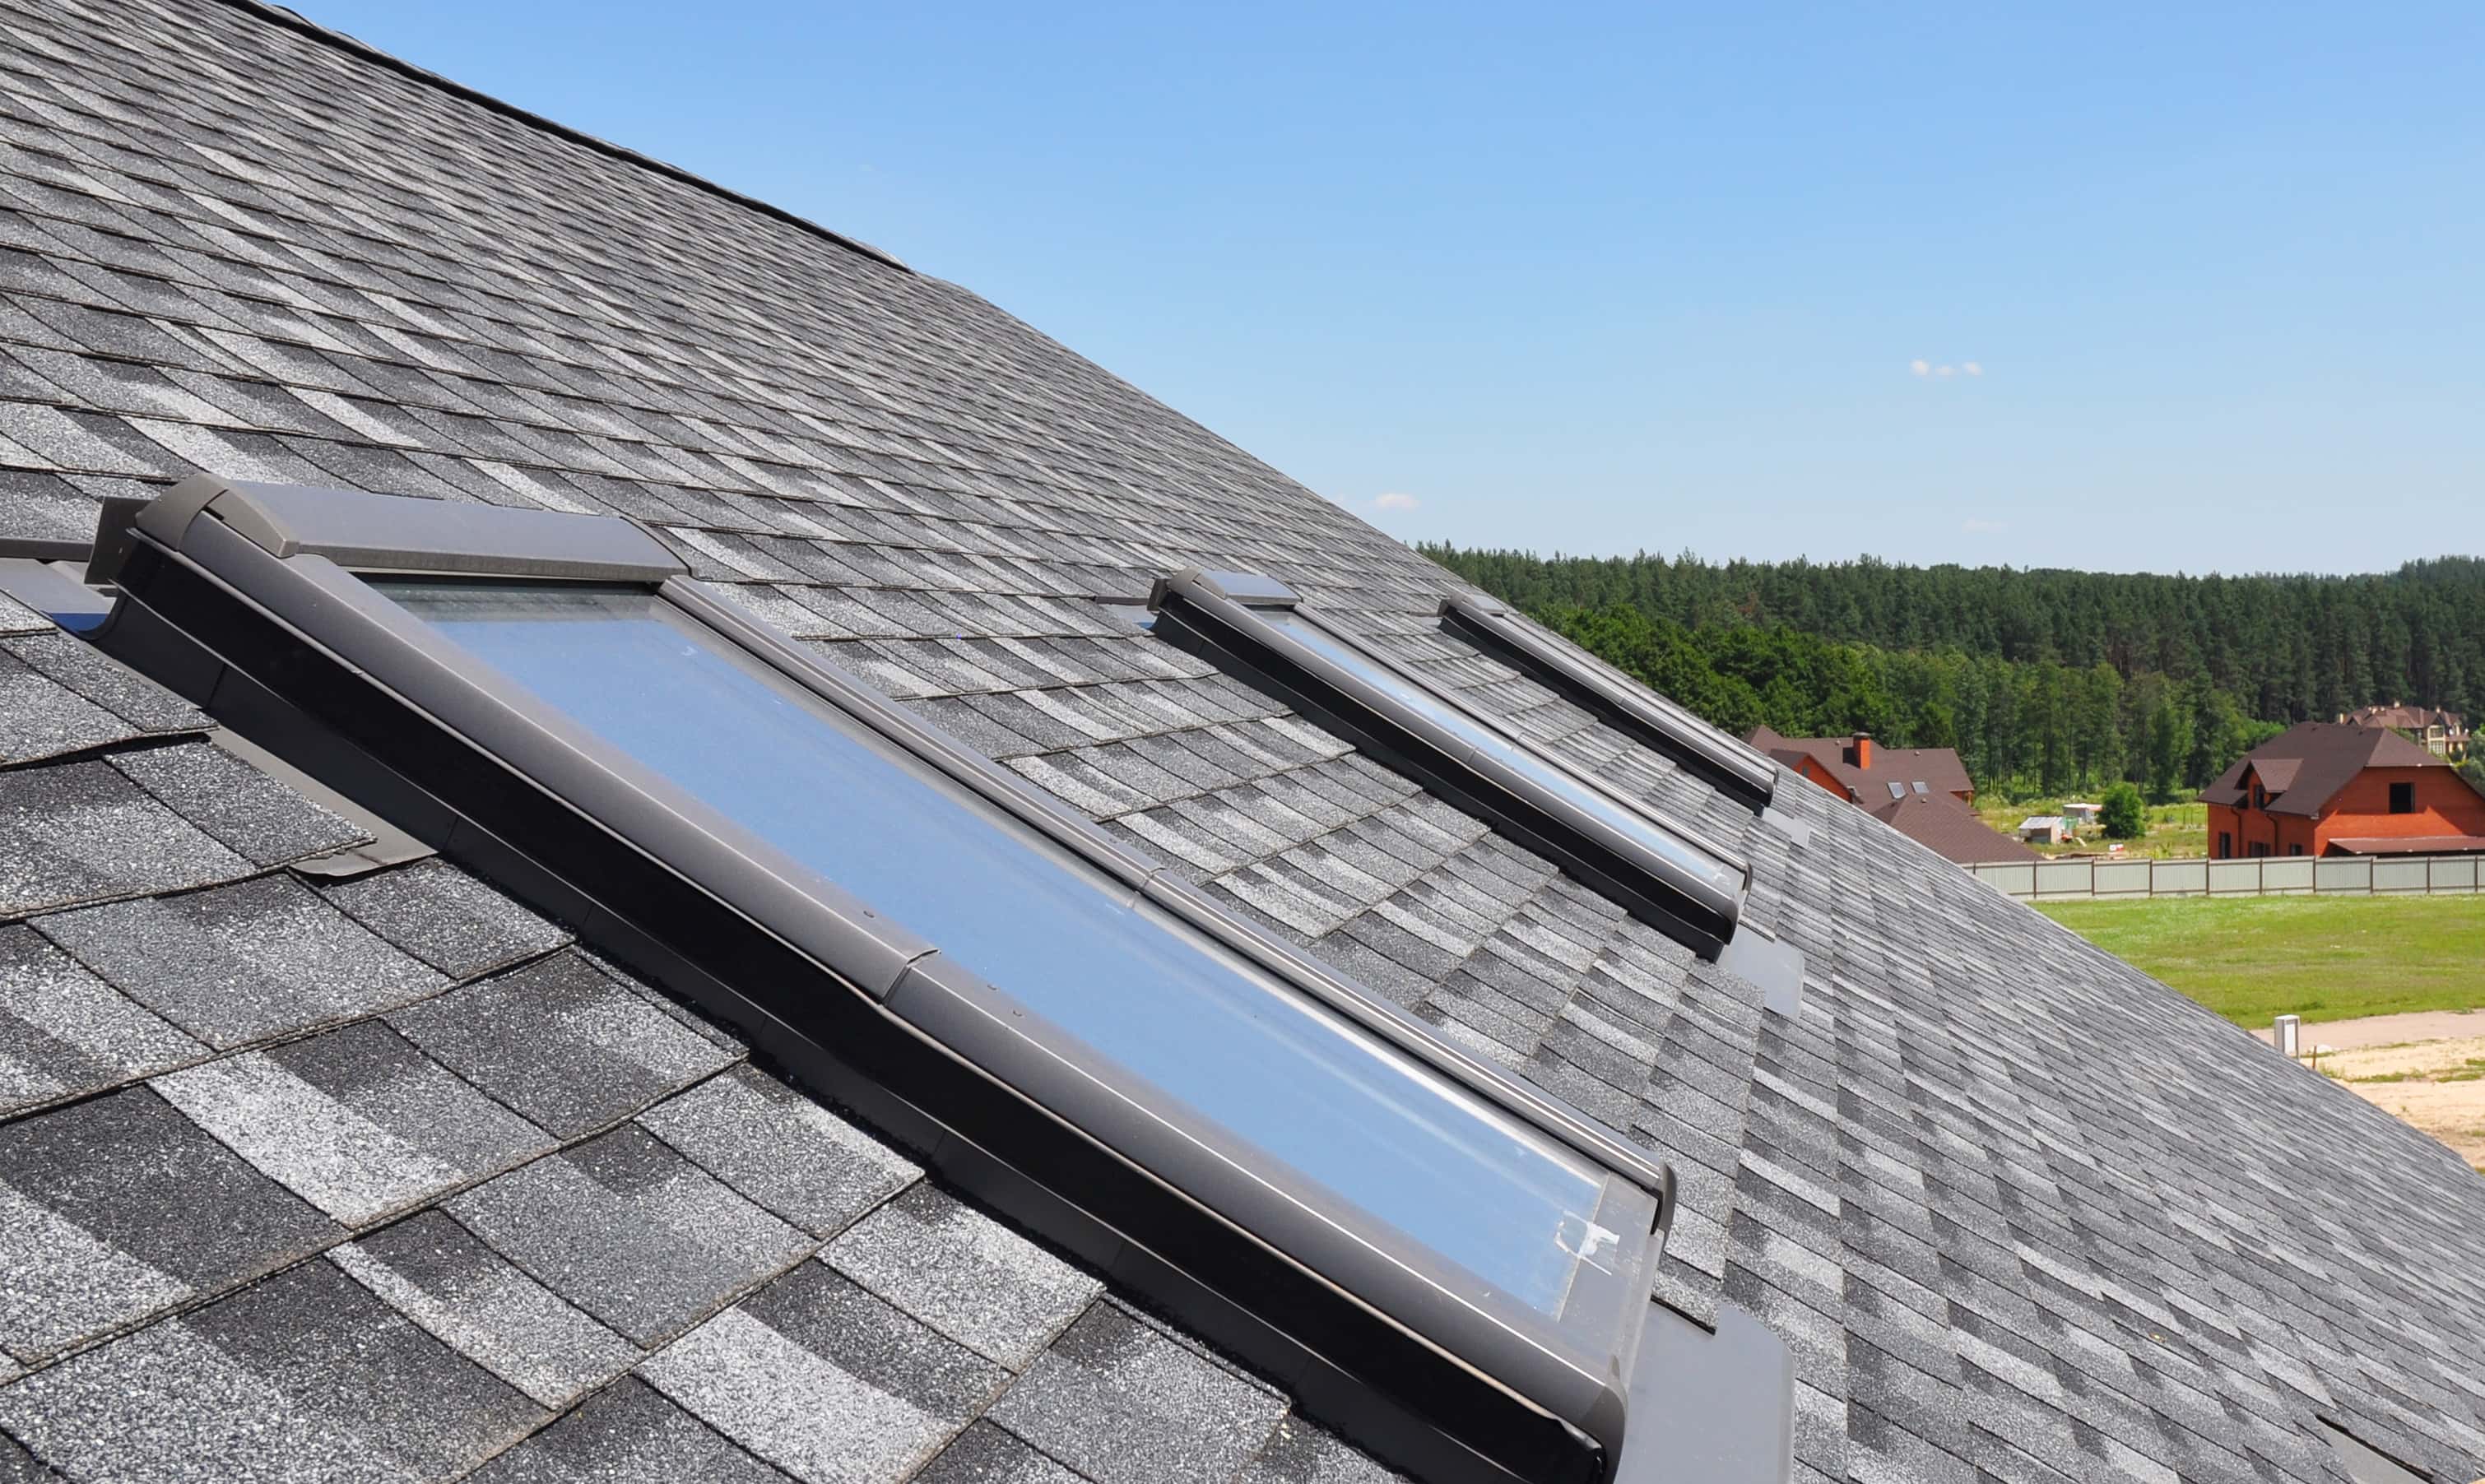 To make a hole in your roof for a skylight, you need Grand Rapids roofing companies like Above. Full Roofing System